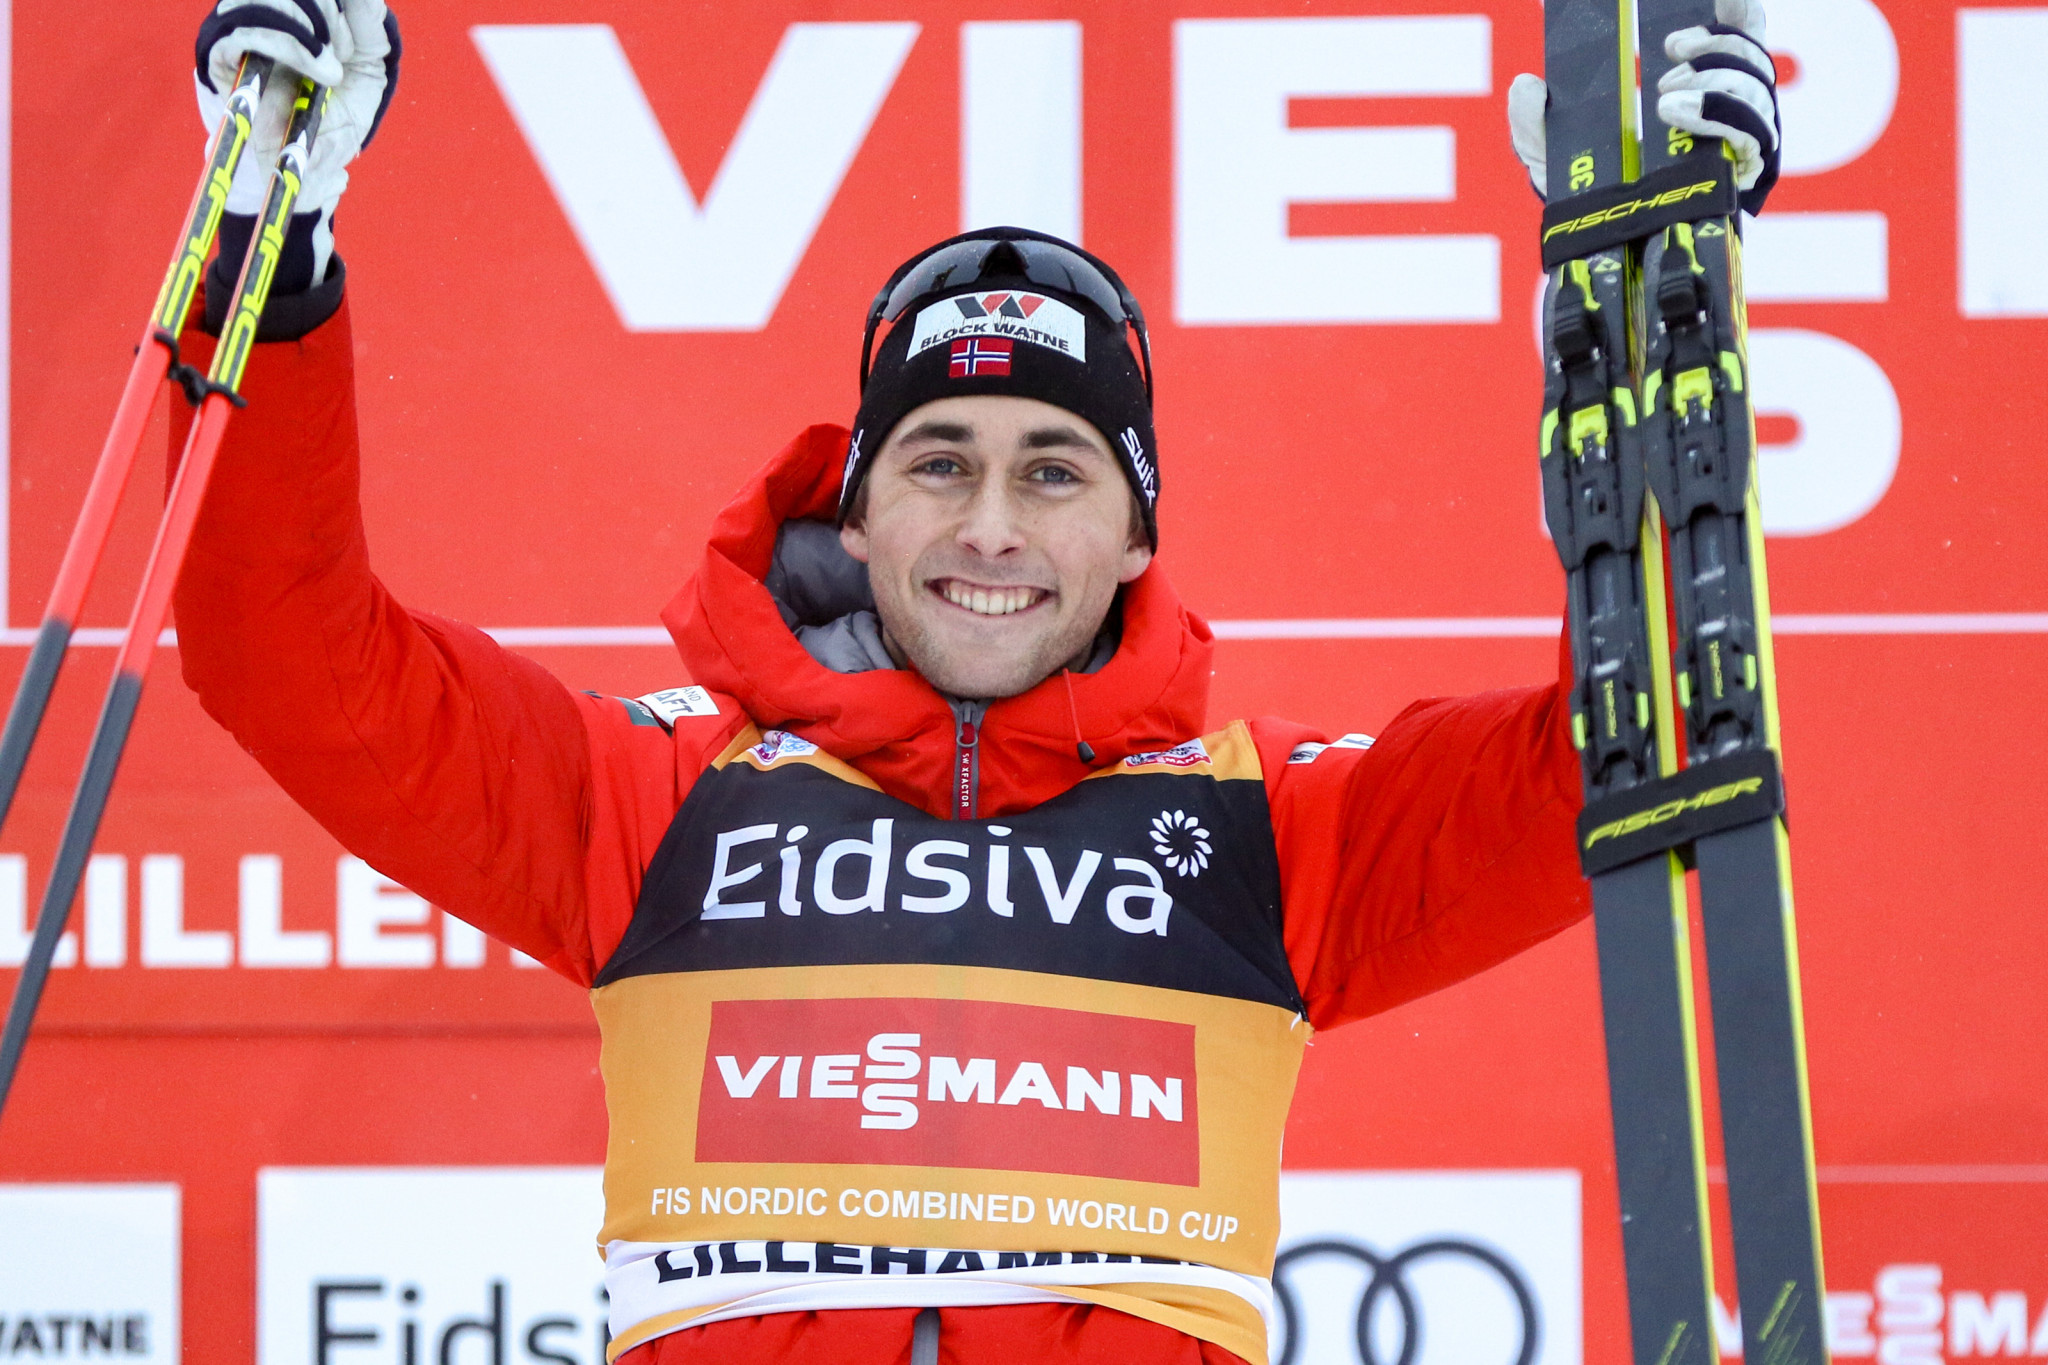 Riiber makes it five wins in a row on FIS Nordic Combined World Cup tour